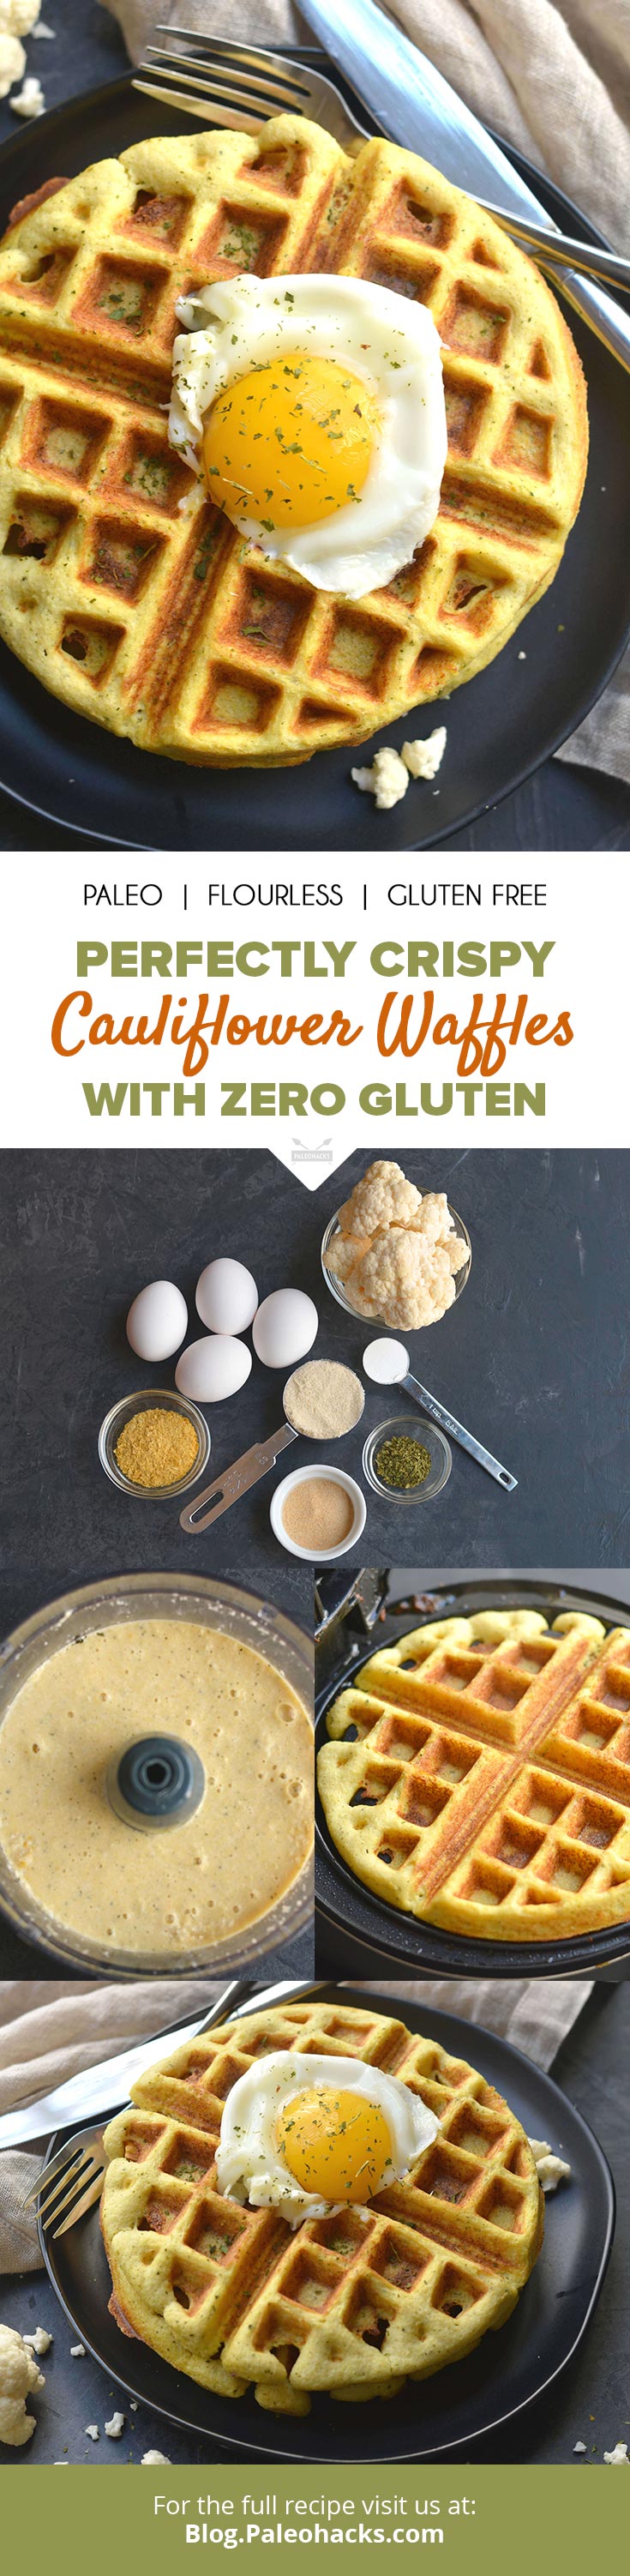 Soft and savory, these cauliflower waffles make for a healthy and gluten-free breakfast. Try with crispy chicken or top with a runny egg for breakfast.